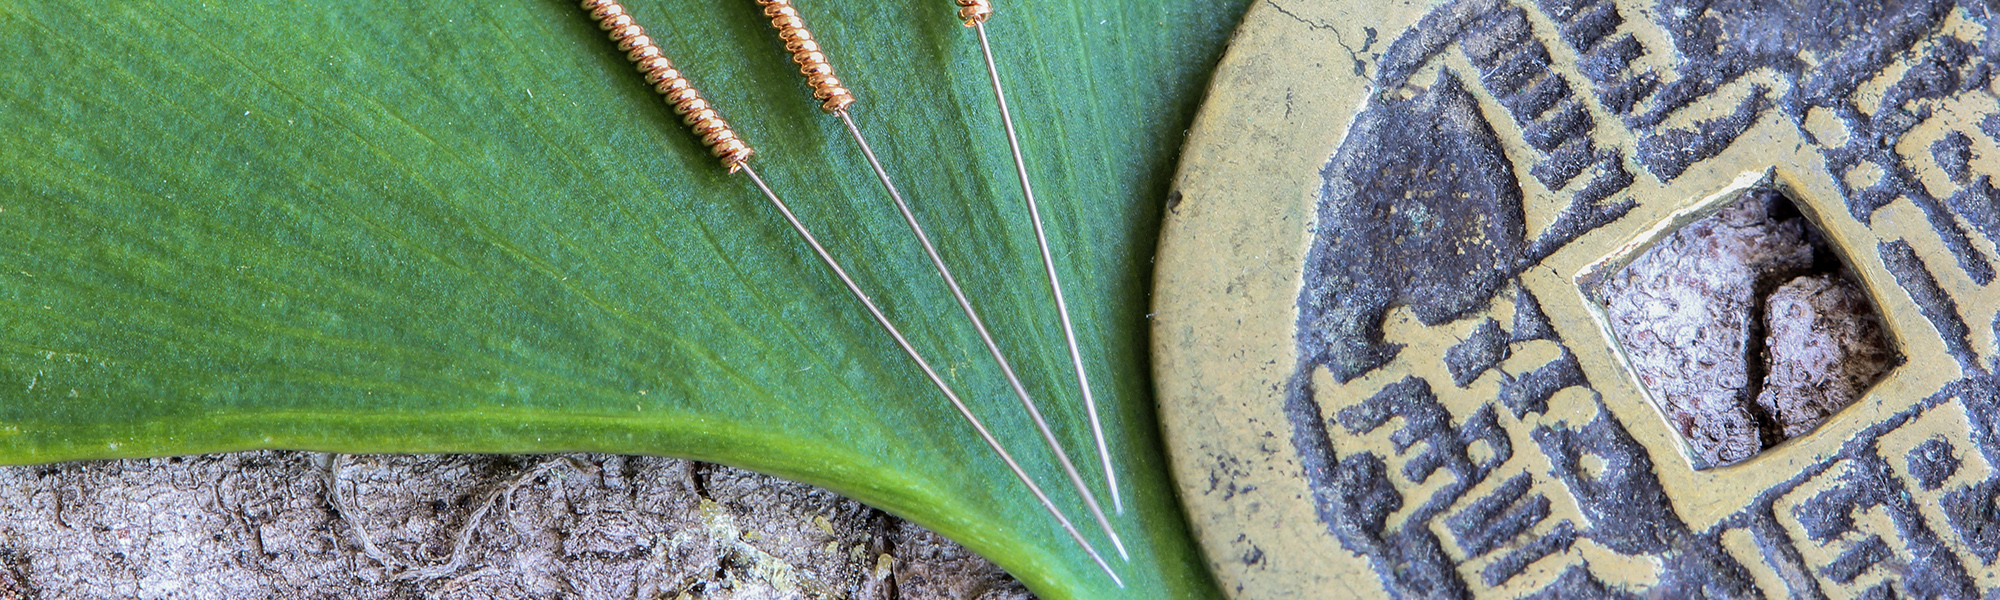 Acupuncture needles on an ancient chinese bronz coin and green ginkgo leaf